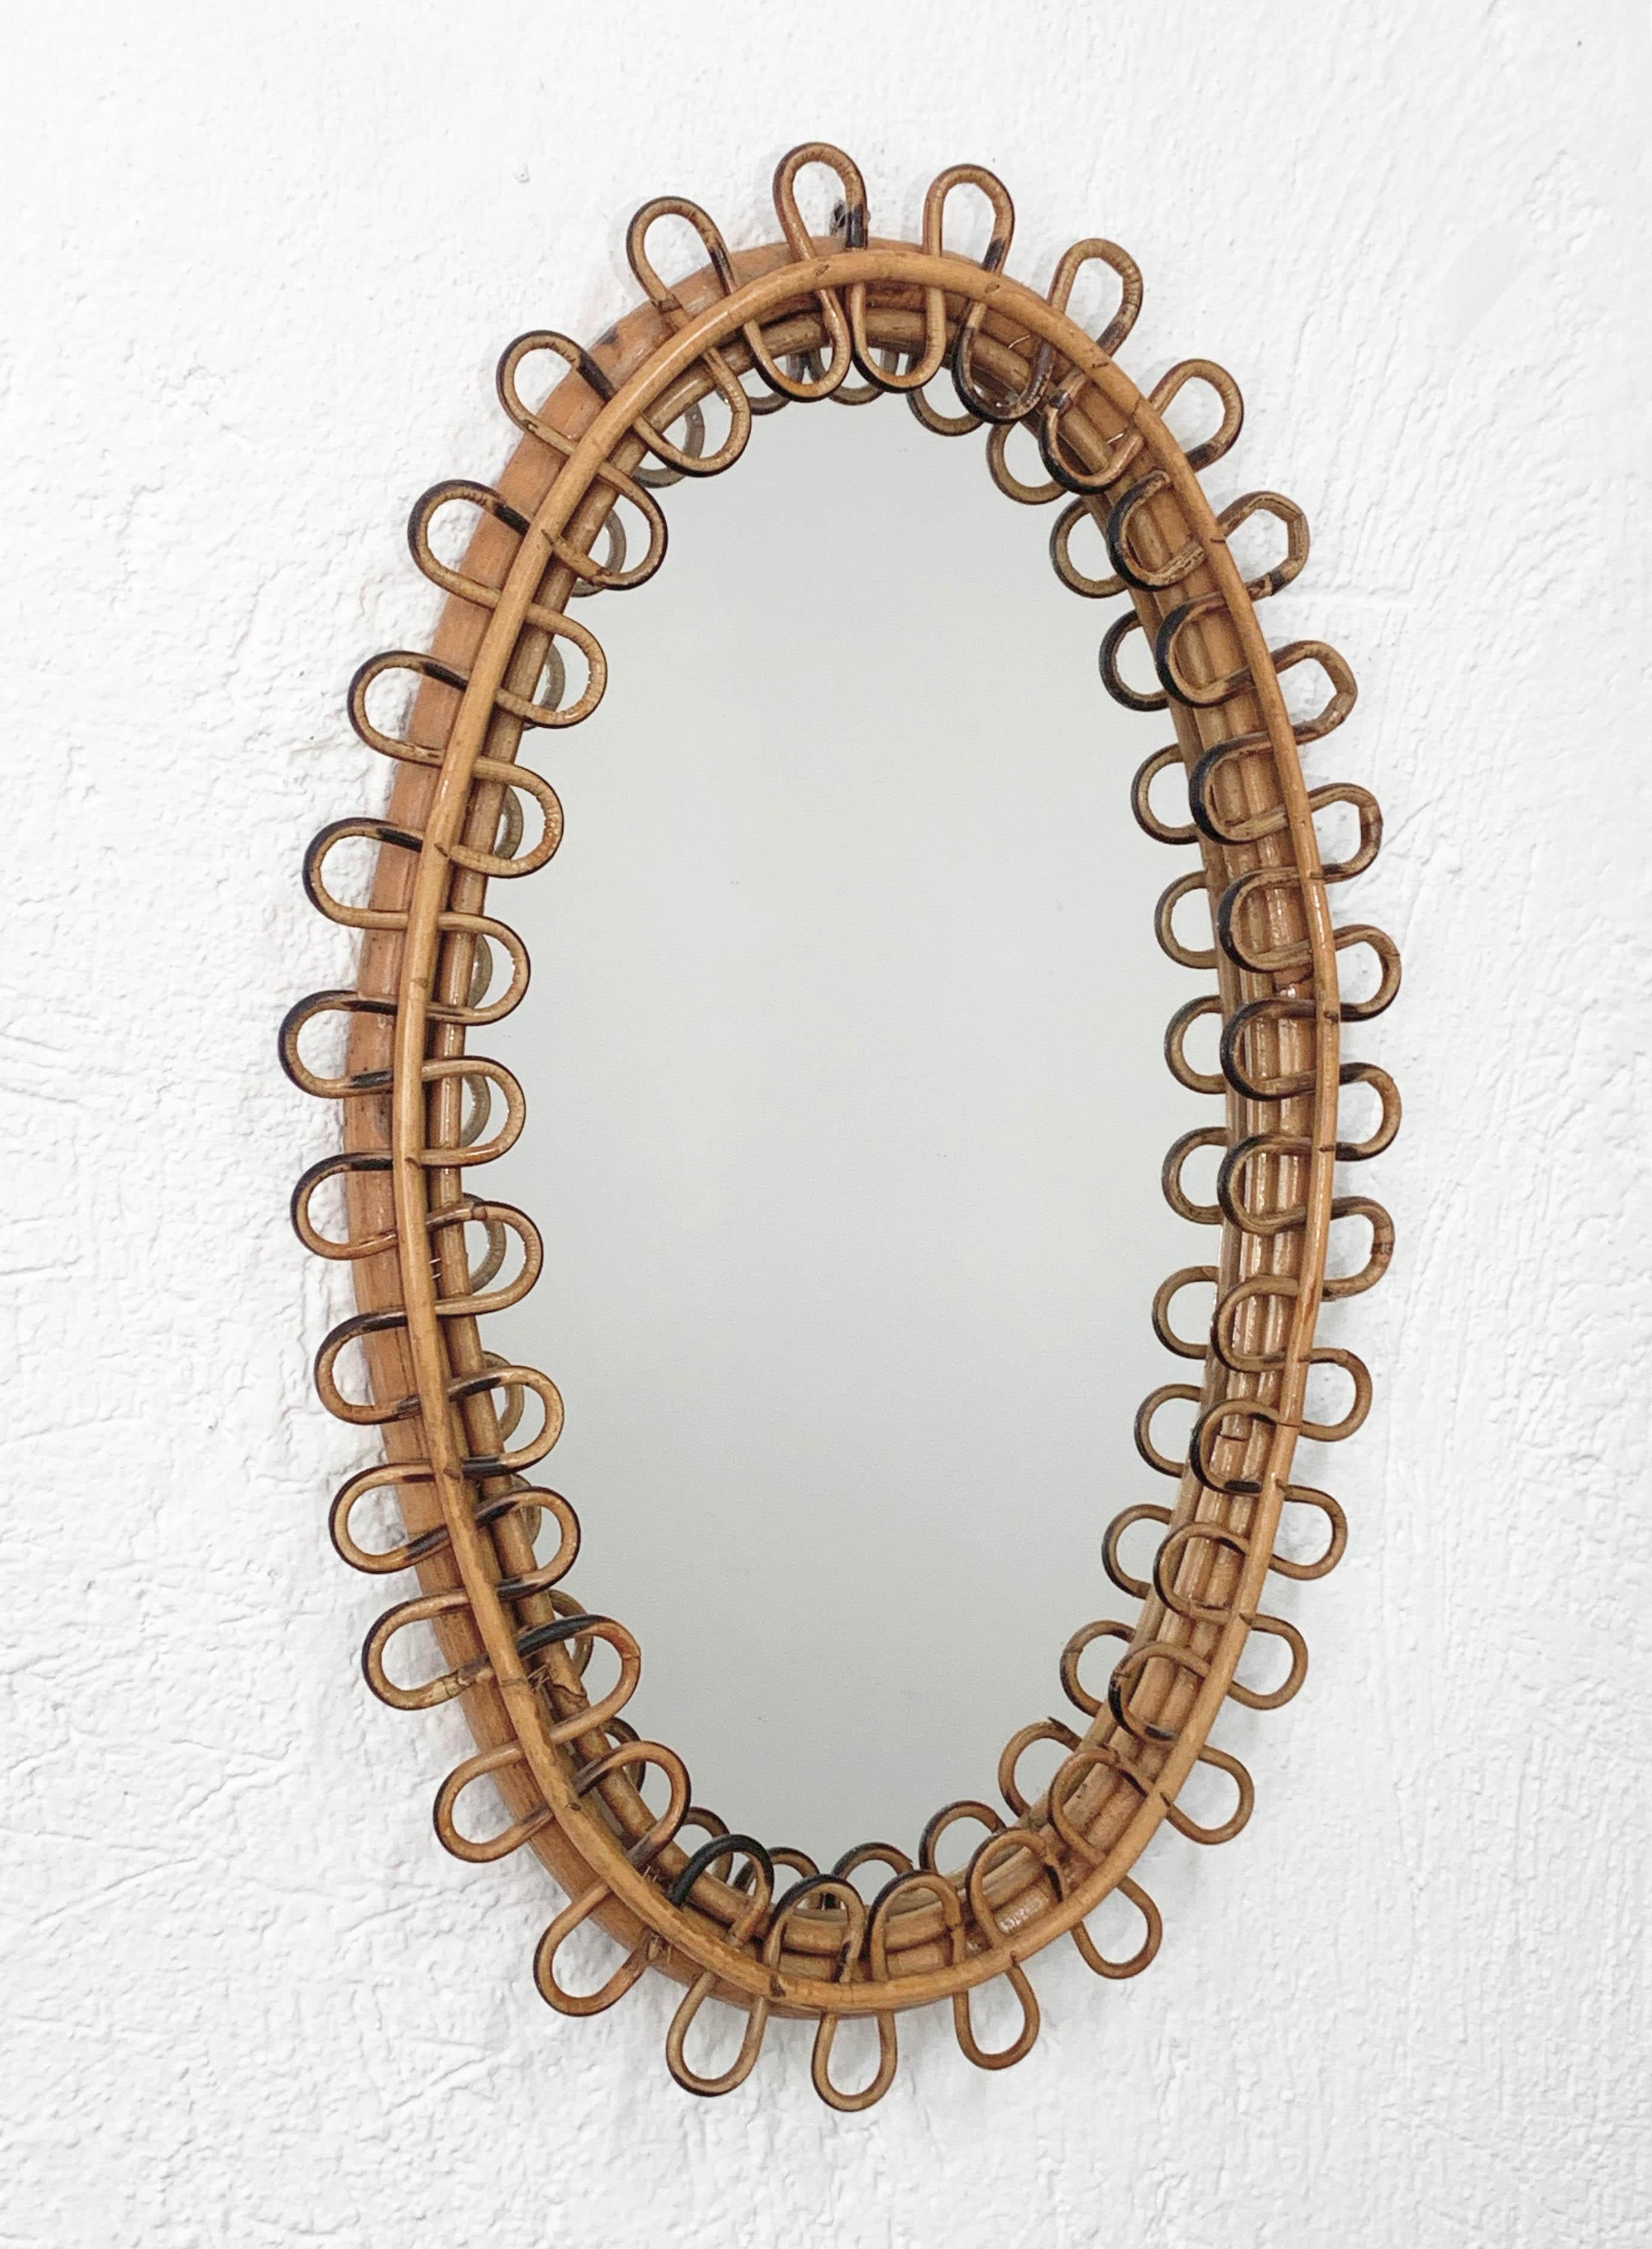 Amazing oval mirror with curved rattan beams and bamboo frame attributed to Franco Albini.

The item was produced in Italy during 1950s. This marvellous midcentury piece will enrich an entrance hall or living room.

Measurements (cm): 
height